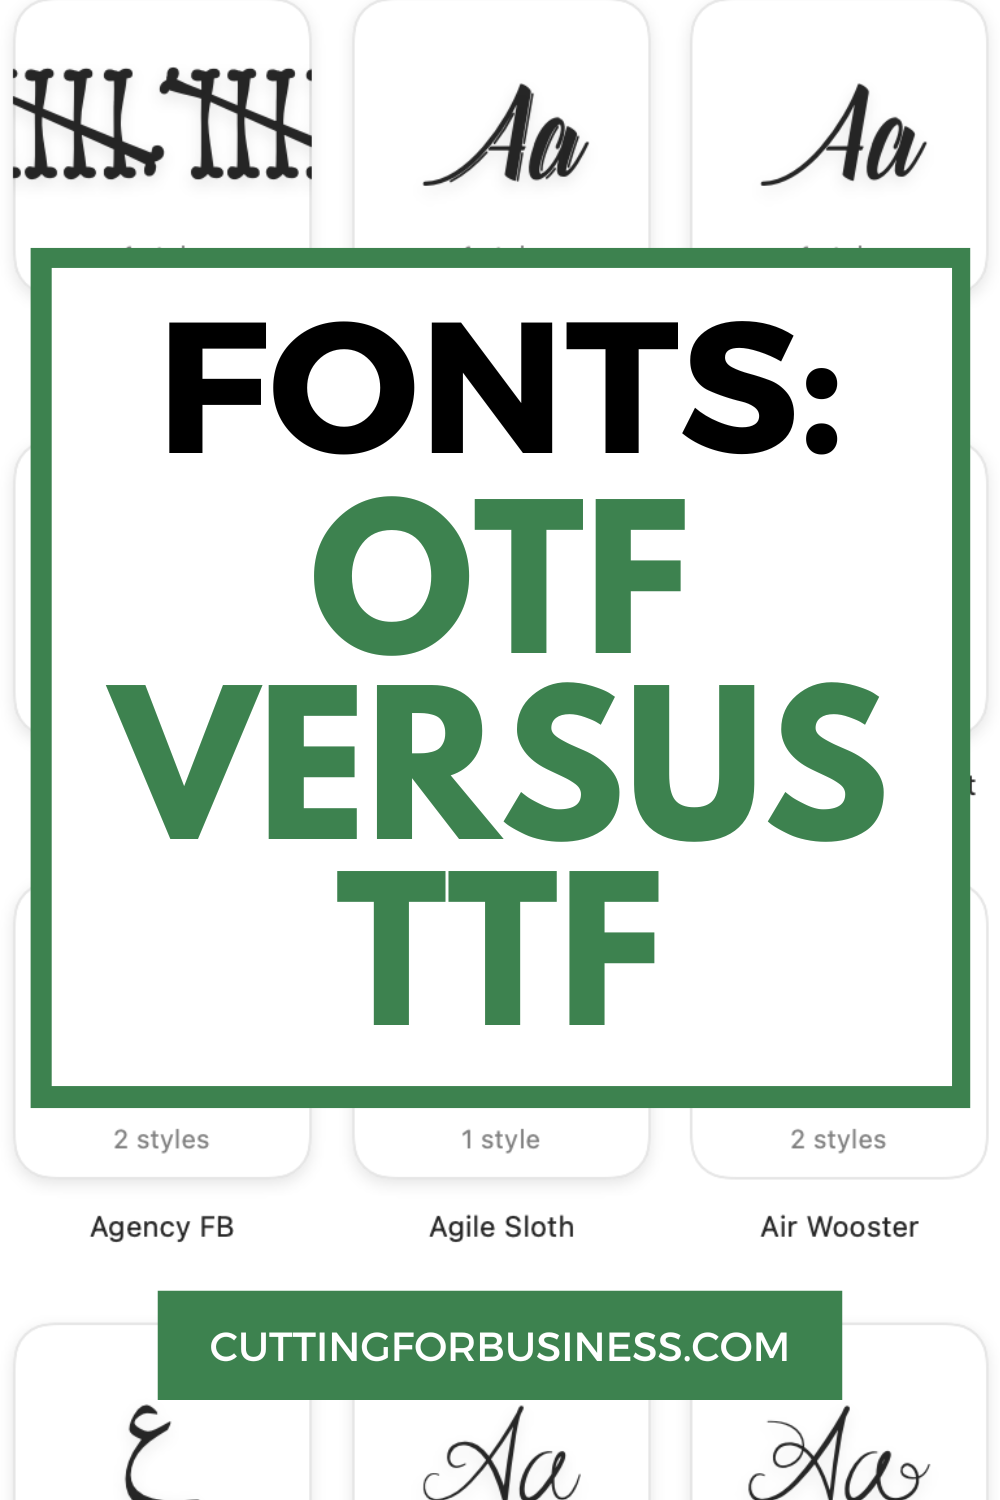 Fonts: OTF versus TTF - What is the Difference? - cuttingforbusiness.com